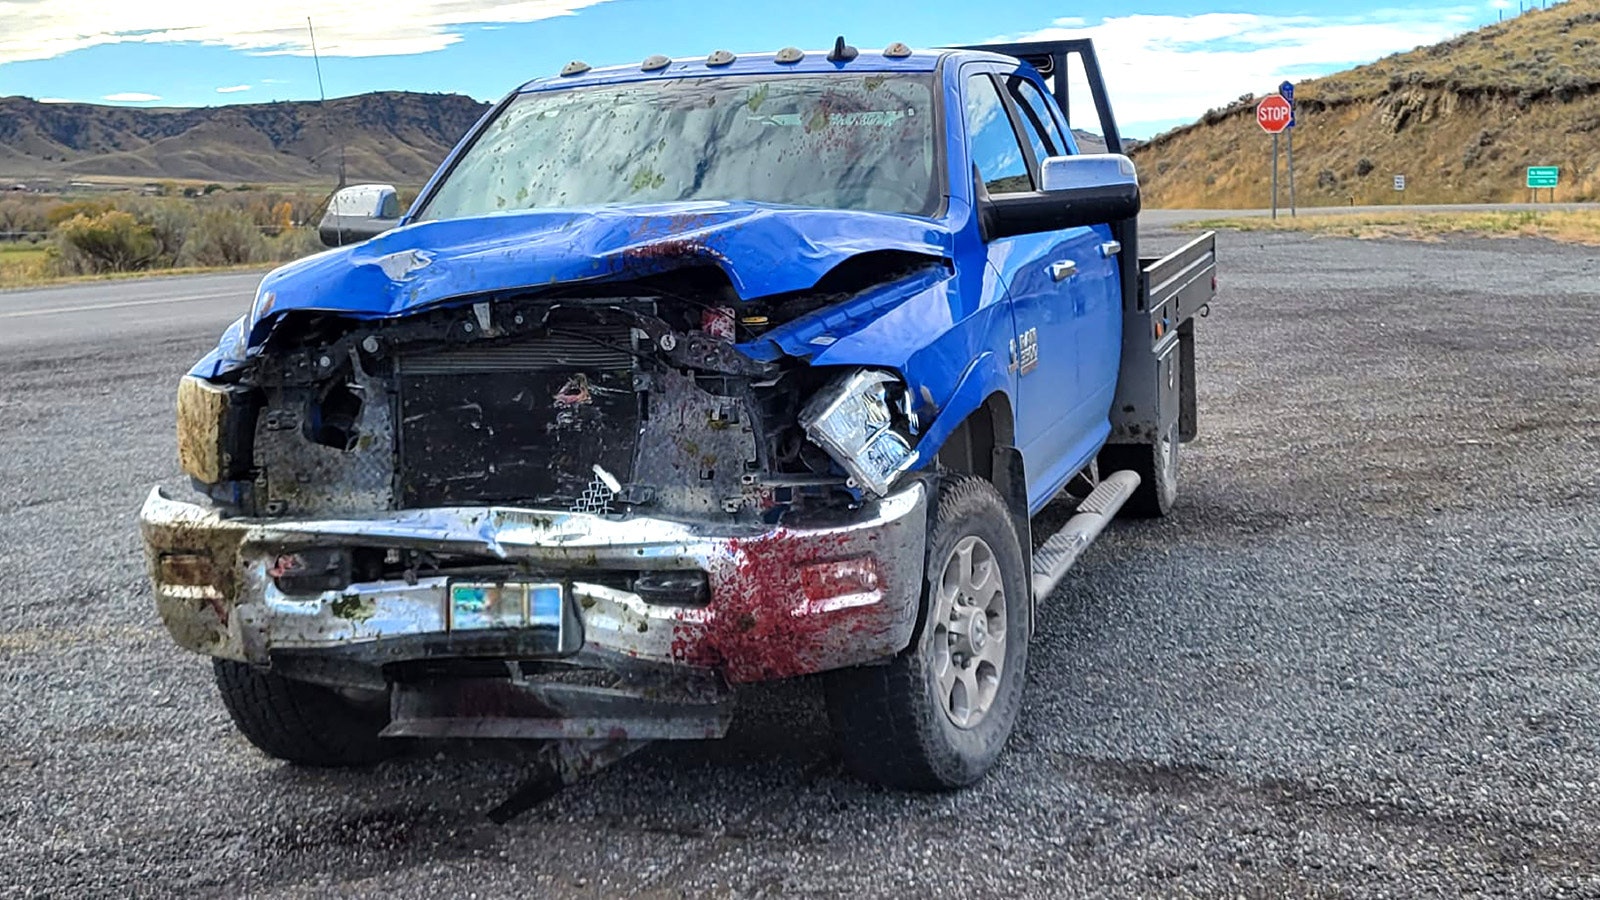 A large Dodge truck was totaled Sunday after it plowed into a herd of elk on Highway 120 near Meeteetse on Sunday.